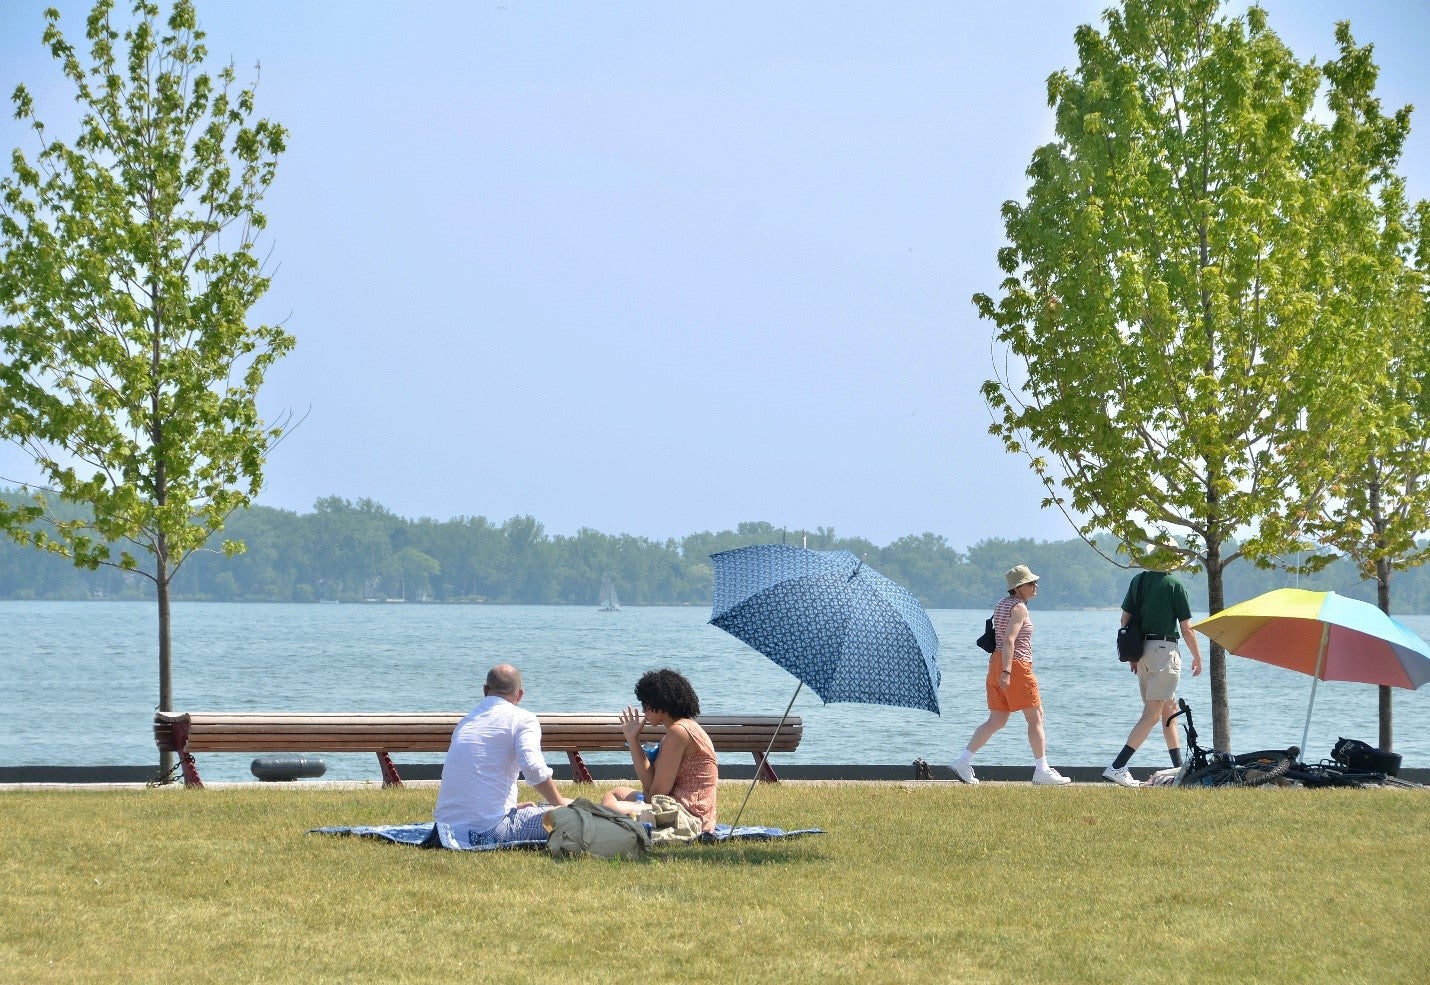 Citizens of Toronto enjoying a pic nic and stroll along the water's edge